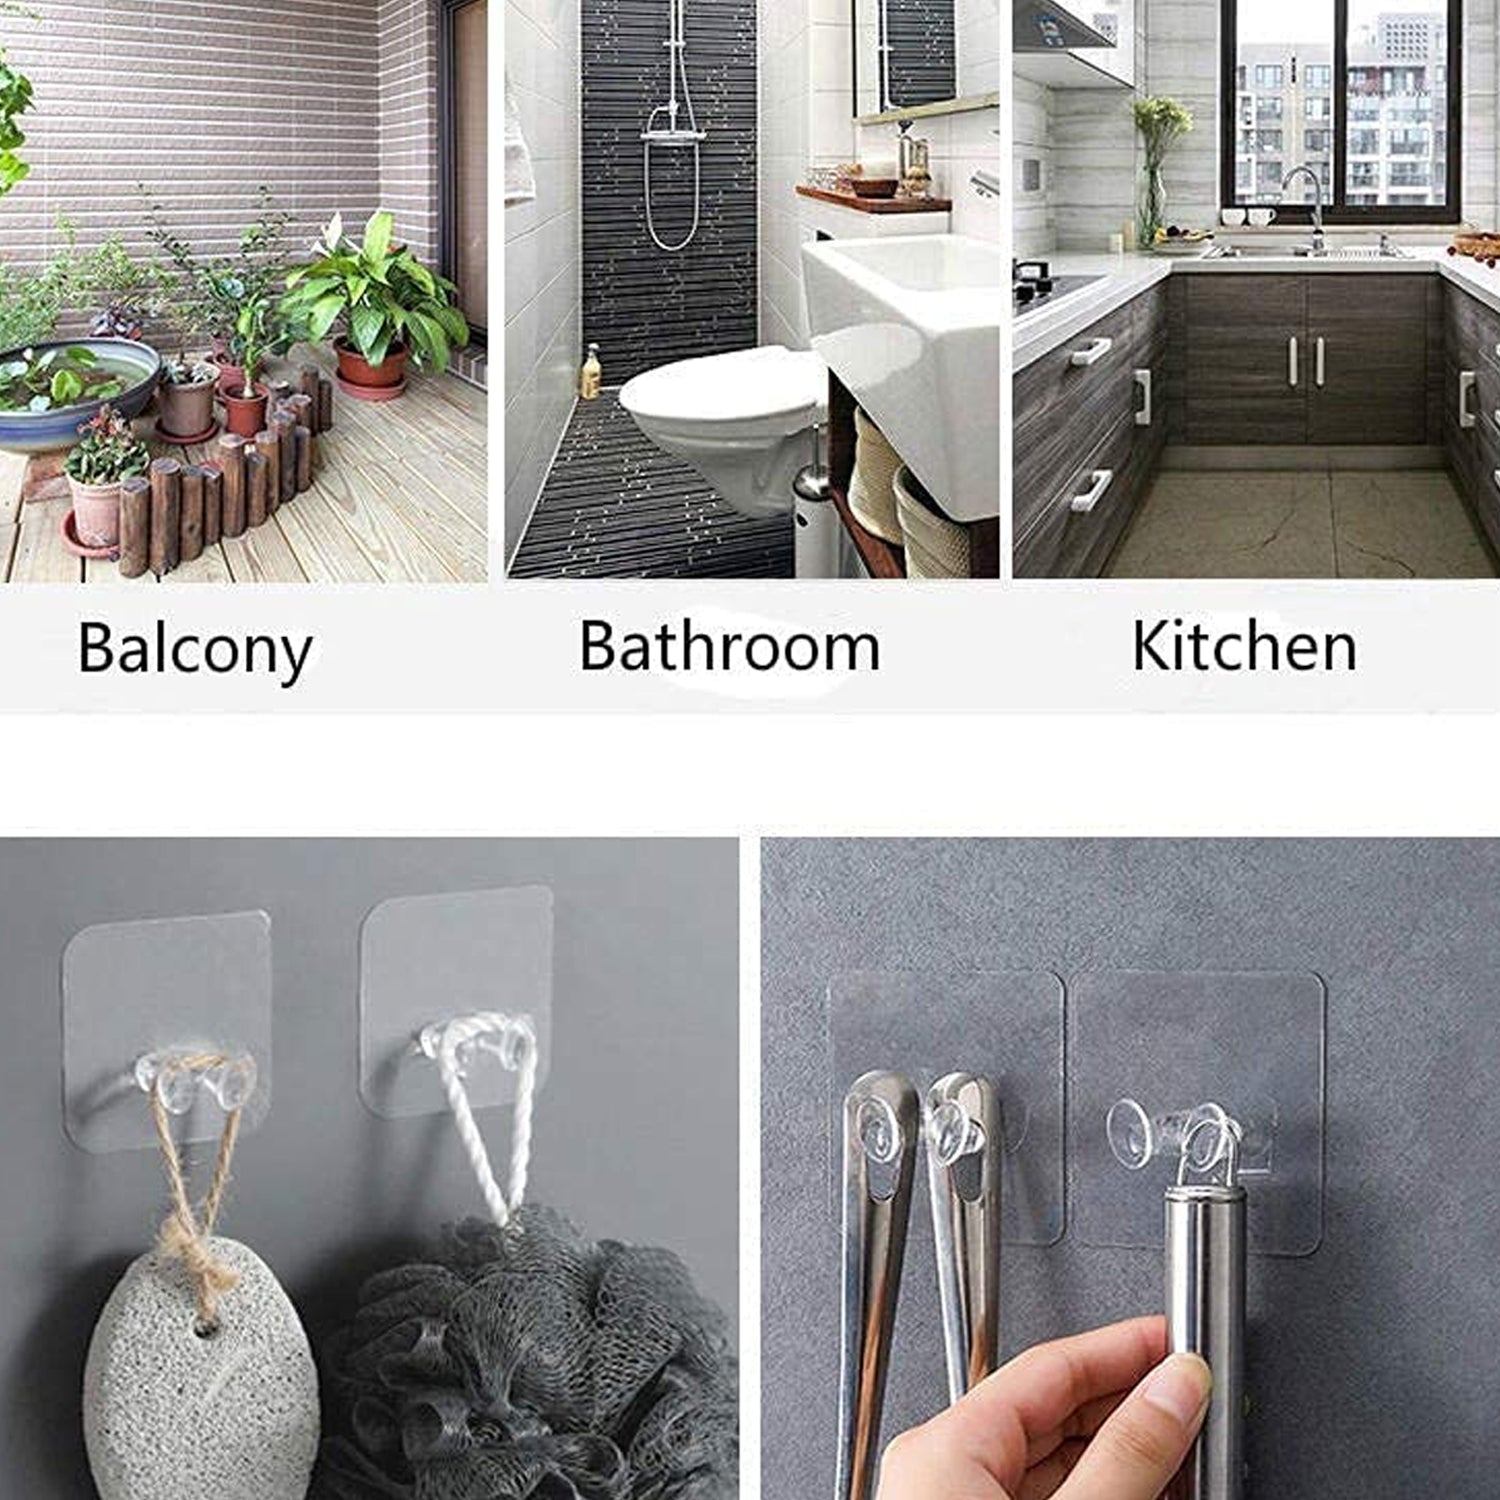 17777 Transparent Self Adhesive Hook Seamless Drill Free Removable Wall Mounted Hanger As Toothbrush Holder Power Plug Socket Holder Waterproof and Oil Proof (1 Pc)